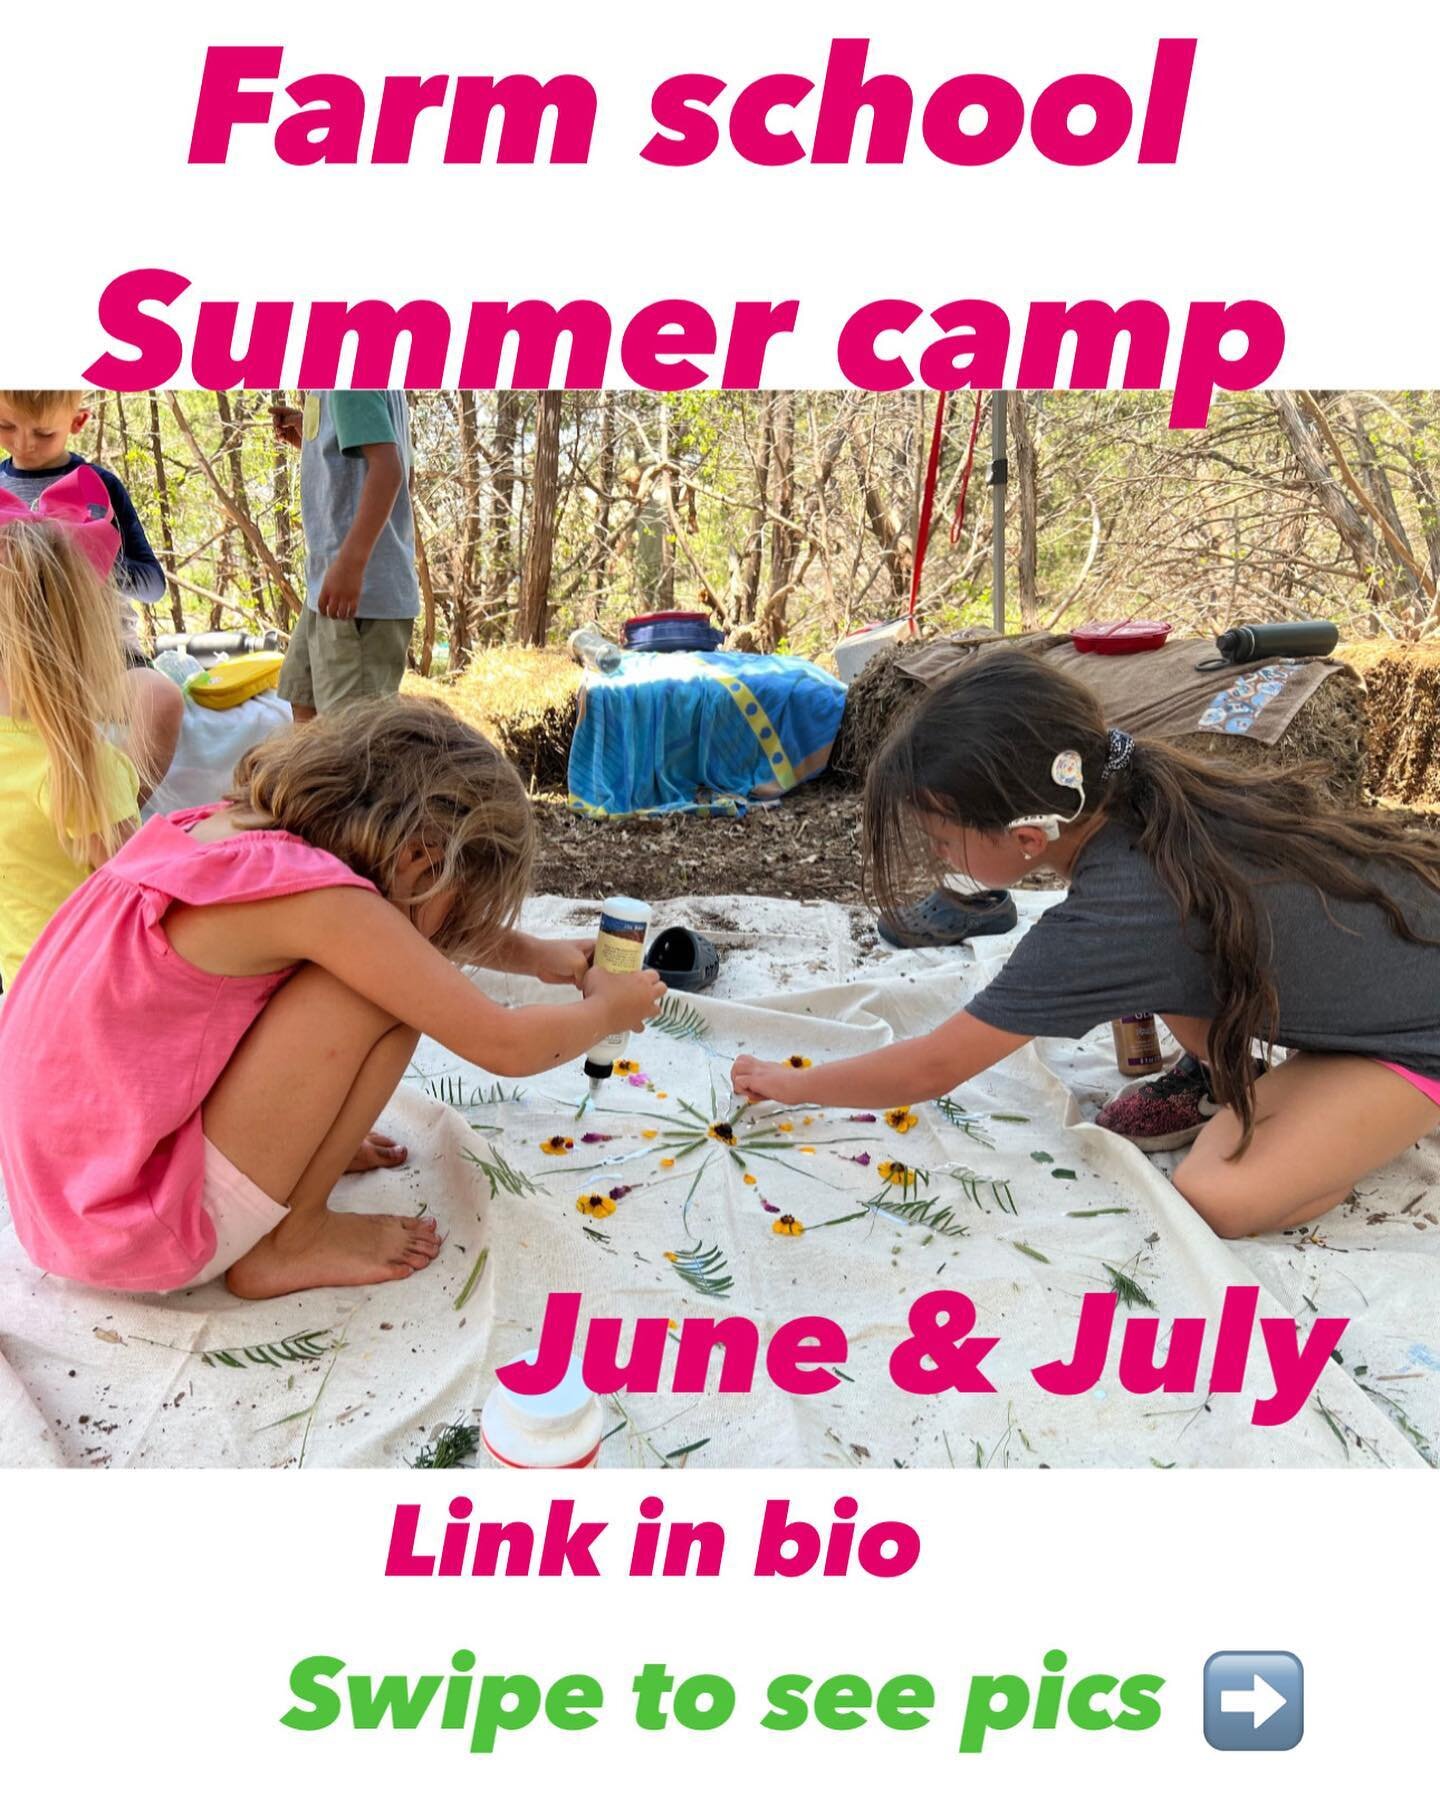 Our very popular Summer Camp still has some spots open. Here&rsquo;s our schedule:

9-11:30 ~ outside on the farm doing fun farm activities, like harvesting, planting, chicken &amp; sheep care, games, composting&hellip;

11:30 ~ When the heat kicks i